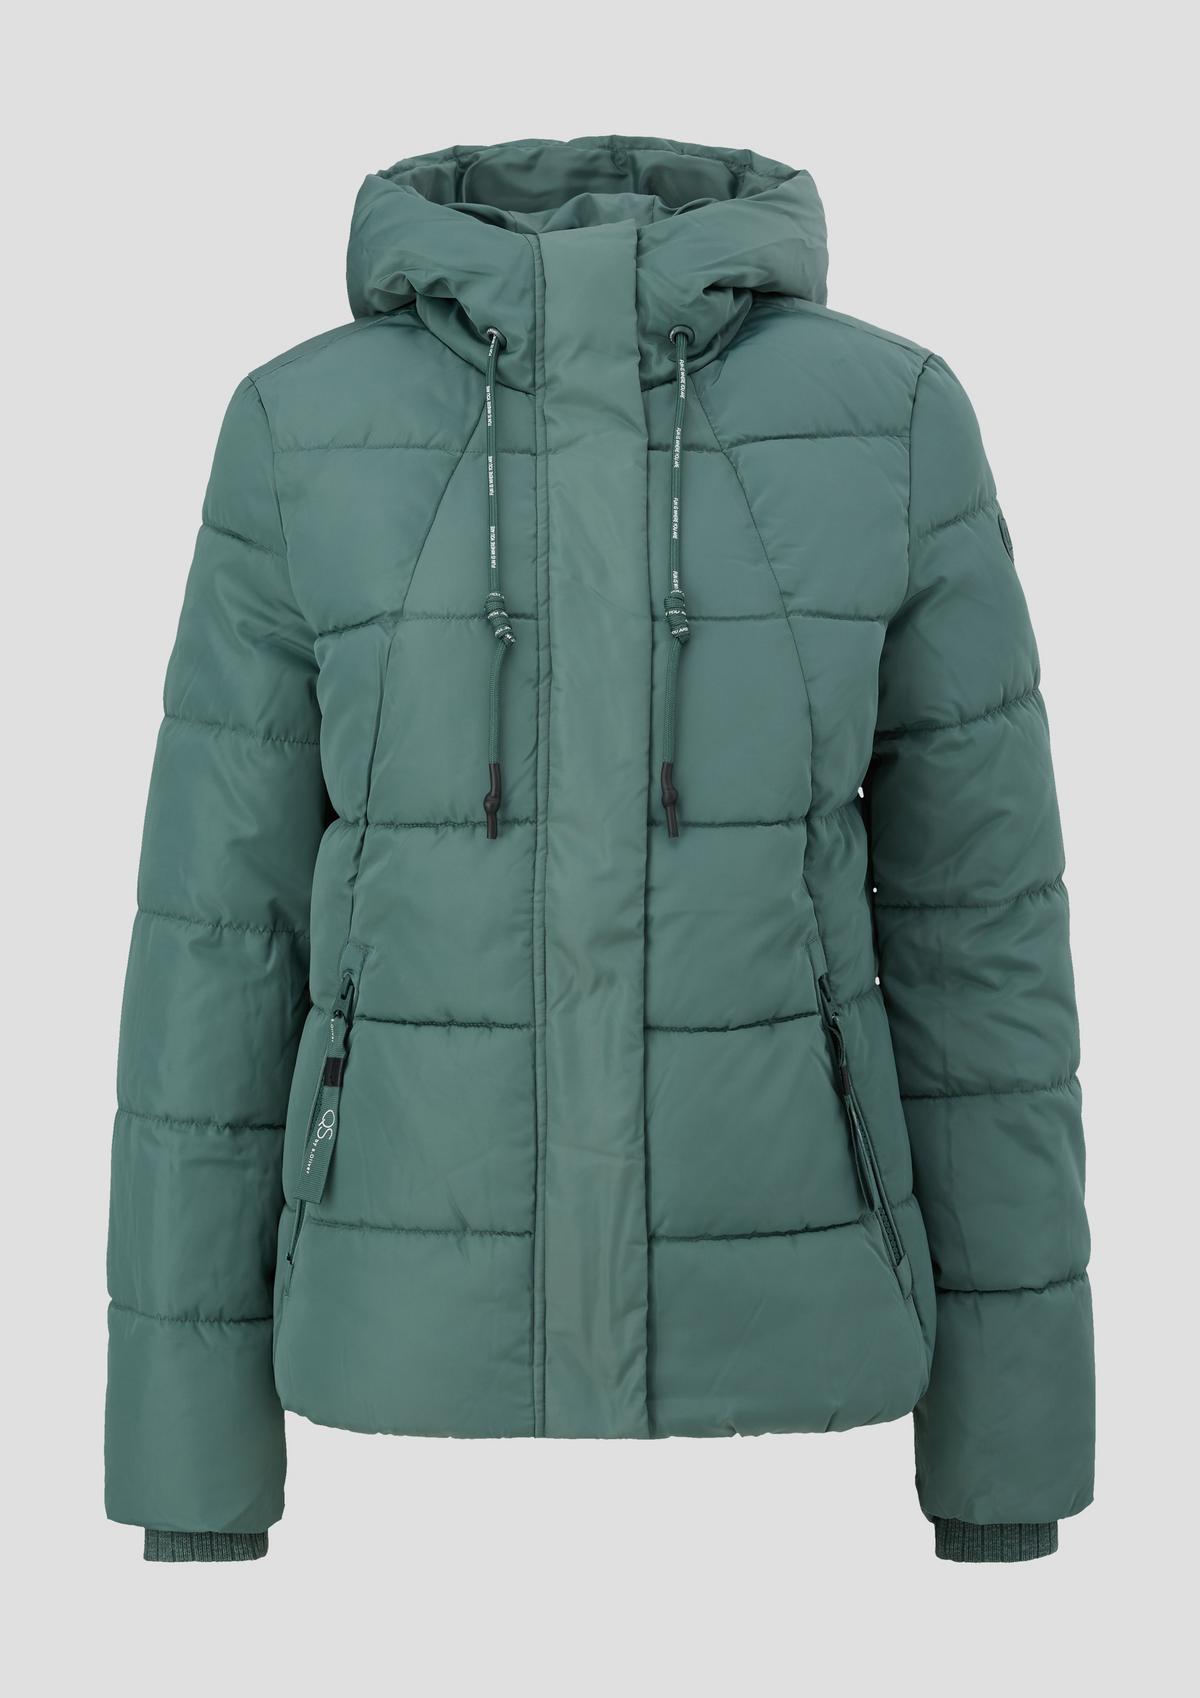 Quilted jacket with zip pockets - ocean blue